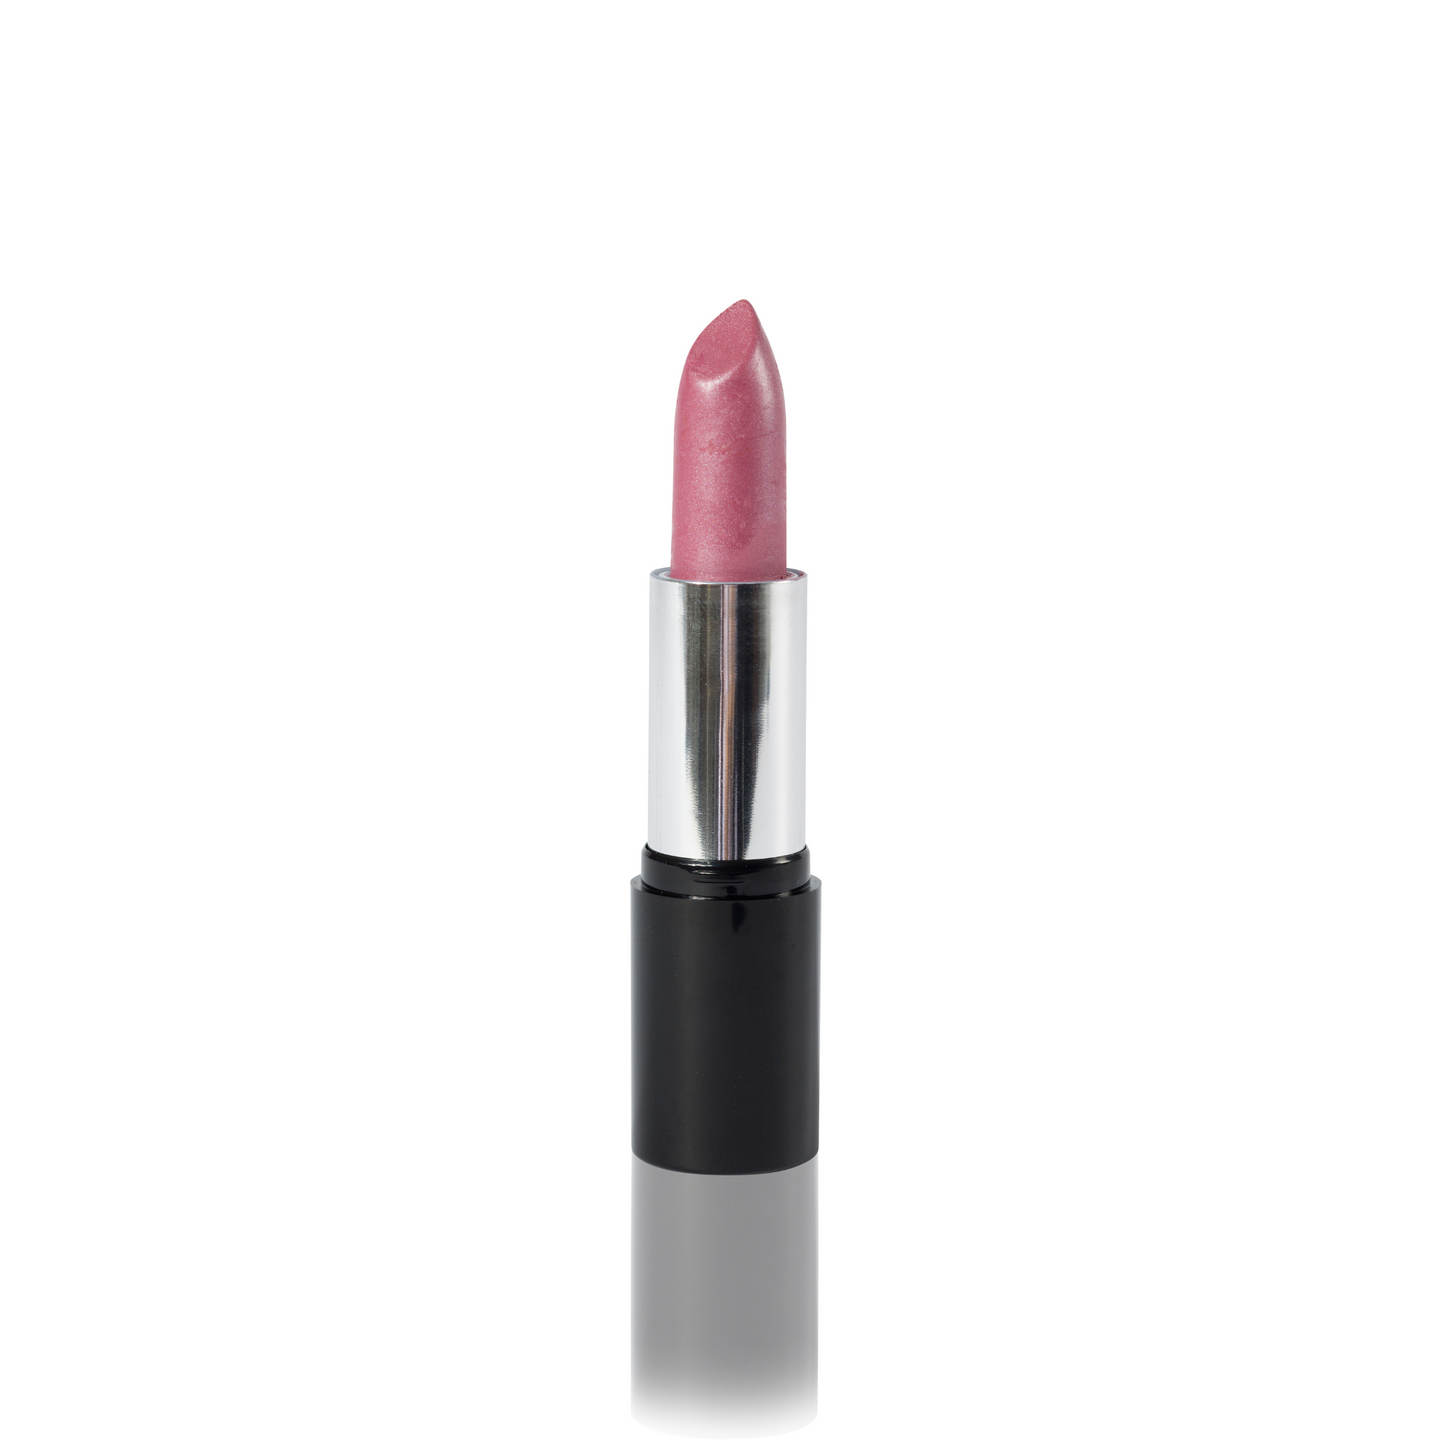 A single tube of the odylique marshmallow natural mineral lipstick with the cap removed, revealing the light pink shade, set against a plain white background.